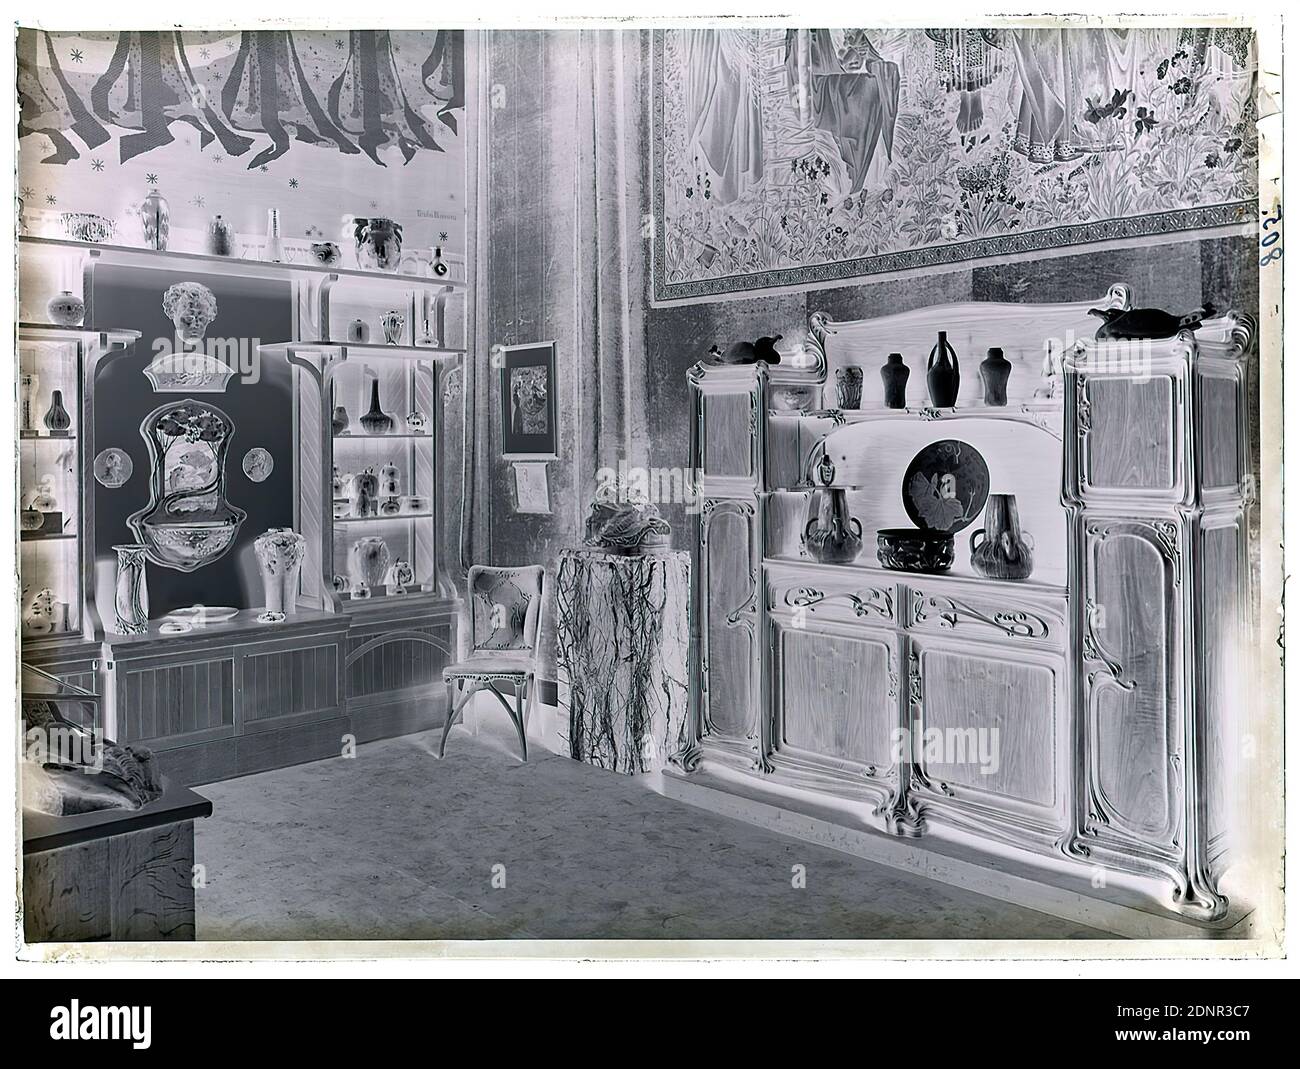 Wilhelm Weimar, Paris room, exhibition, glass negative, black and white negative process, total: height: 23.8 cm; width: 17.8 cm, numbered: re. : in black ink: 805, photography, chair, cabinet, seagull, fountain, museum, interior decoration (of a house), arts and crafts, applied arts, industrial design, museum Stock Photo